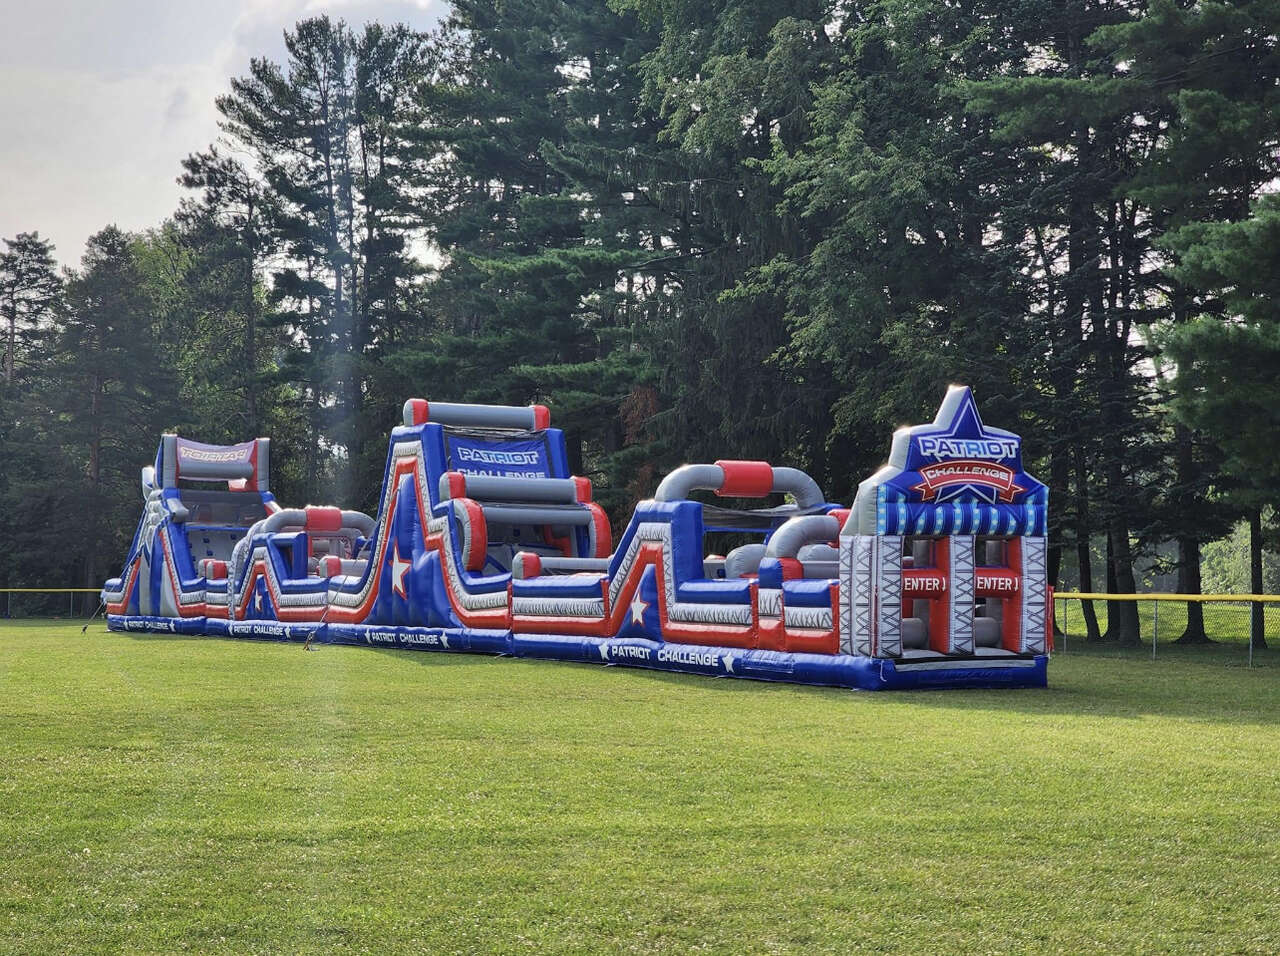 obstacles courses rental, from Fun Bounces Rental in Minooka, IL 60447